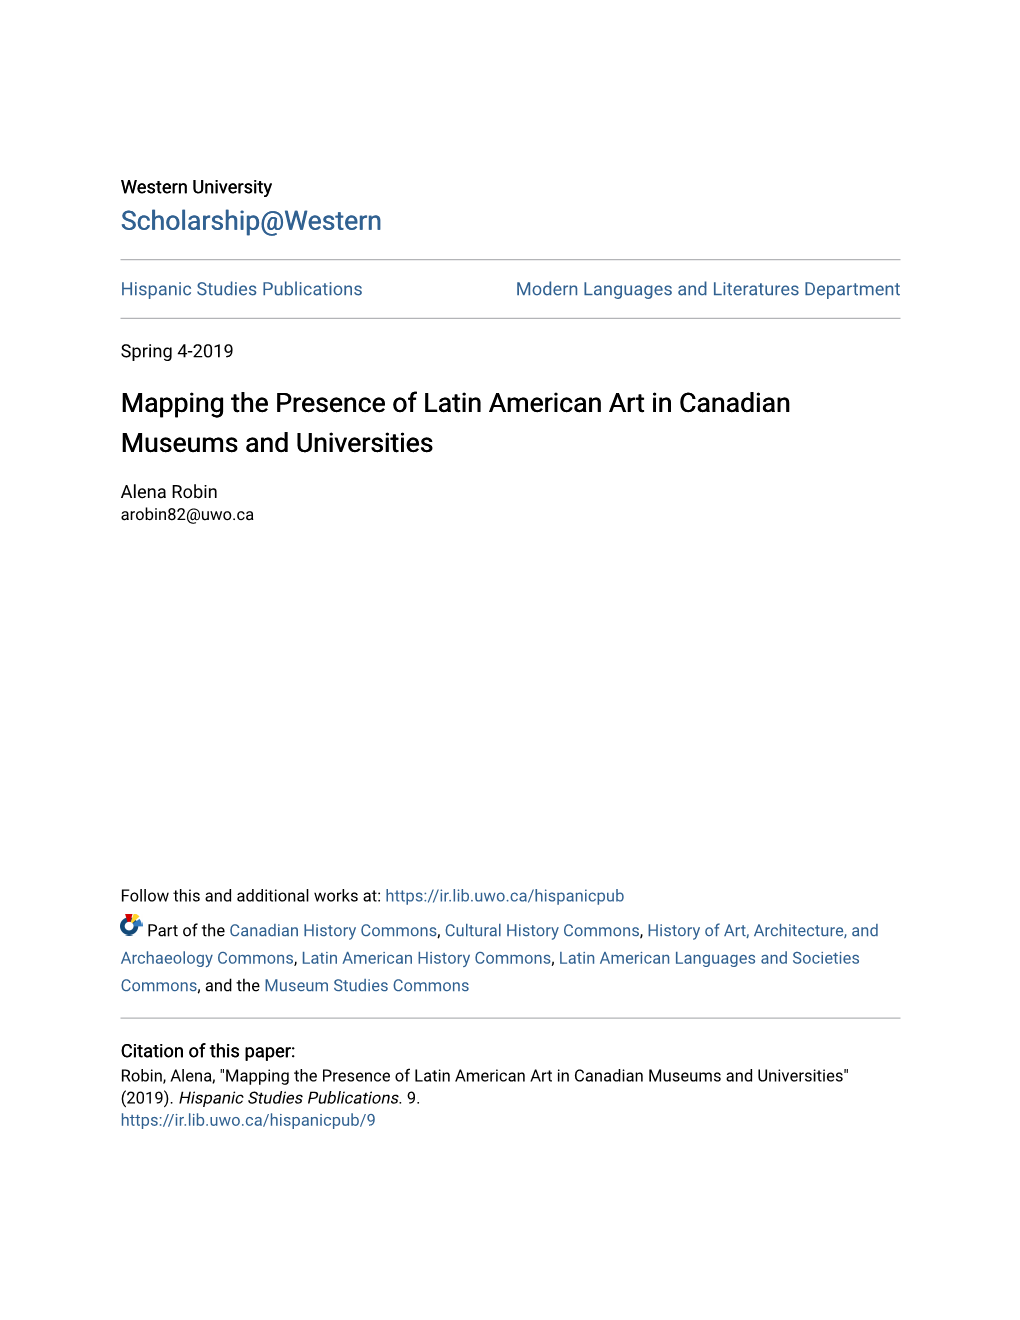 Mapping the Presence of Latin American Art in Canadian Museums and Universities